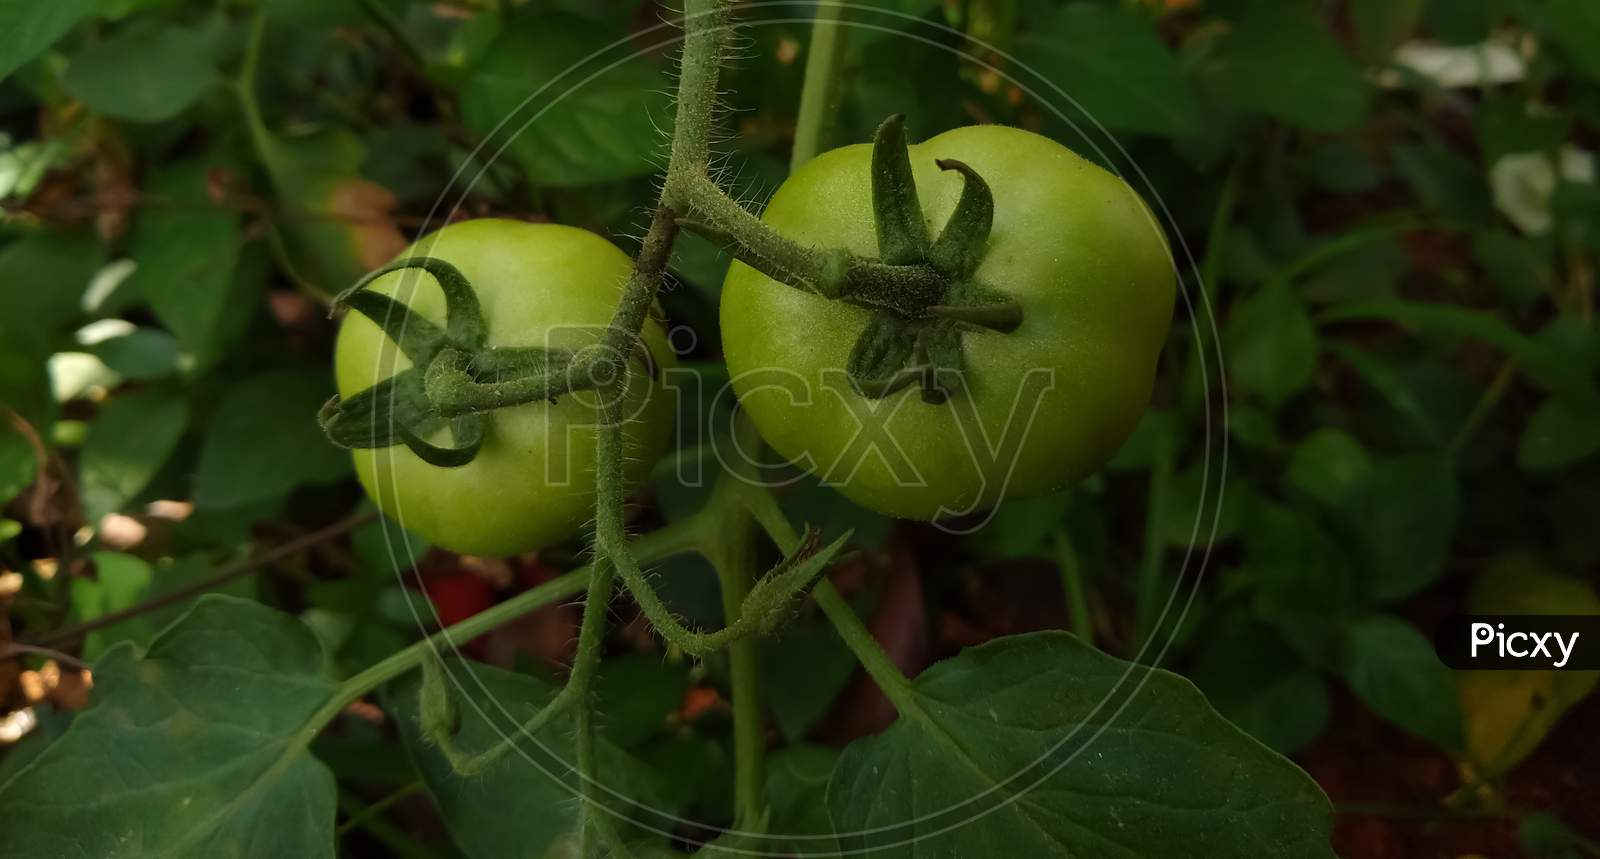 Green tomatoes in the garden